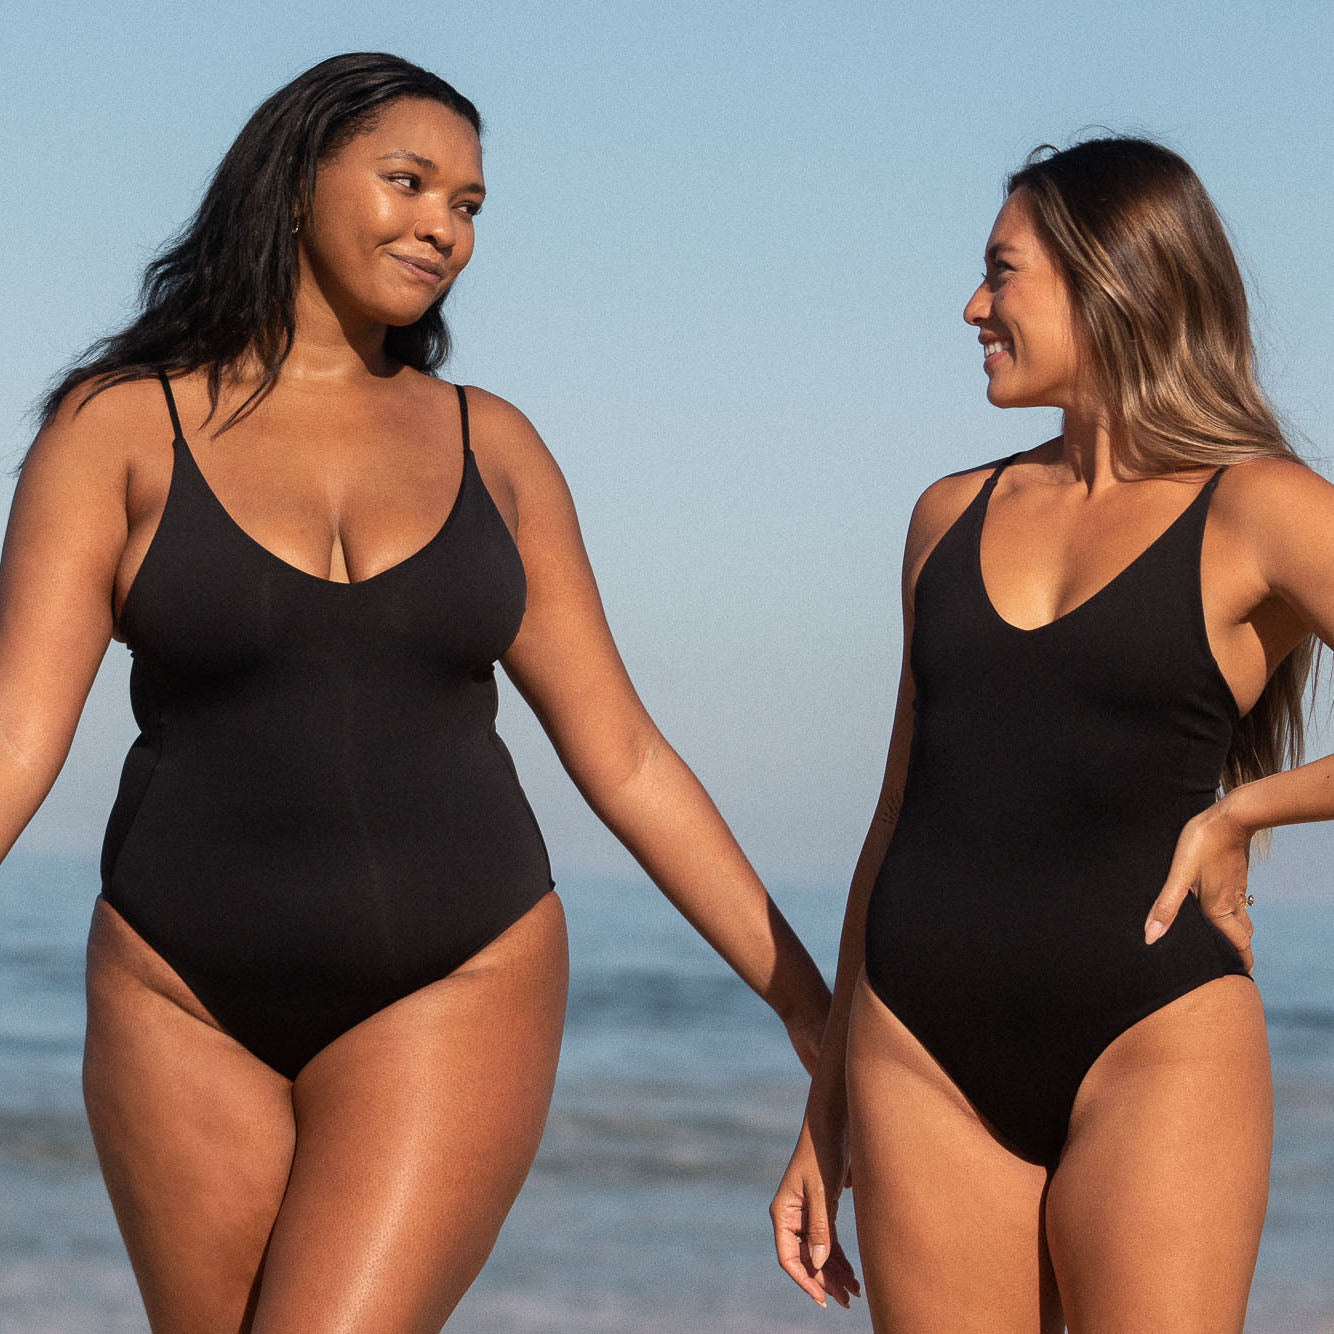 This is your 24/7, 365. From swimming laps to spontaneous waterfall jumps to the dance floor, just a few reasons why this suit will be your #1. A v neck one piece swimsuit that suits all boobs with a high cut leg and minimal bum coverage. One of Left on Friday's best sellers, for good reason, with its insanely soft, smoothing coverage fabric.